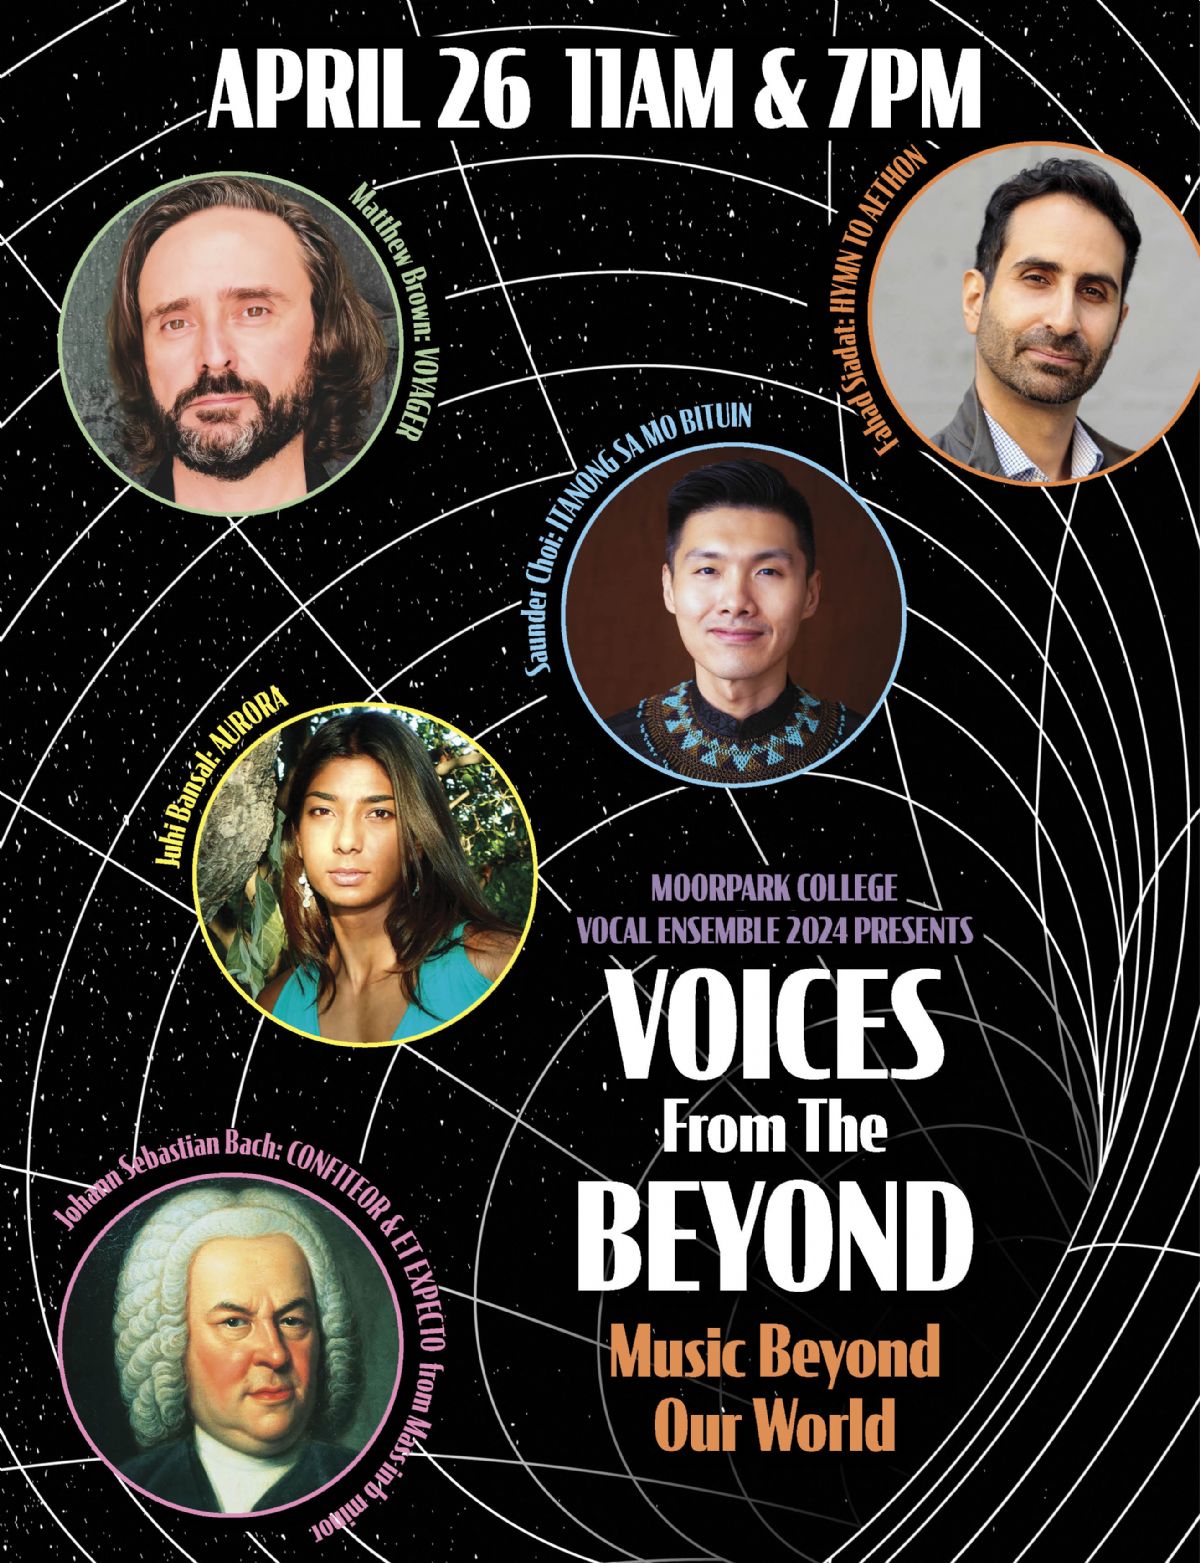 VOICES FROM THE BEYOND